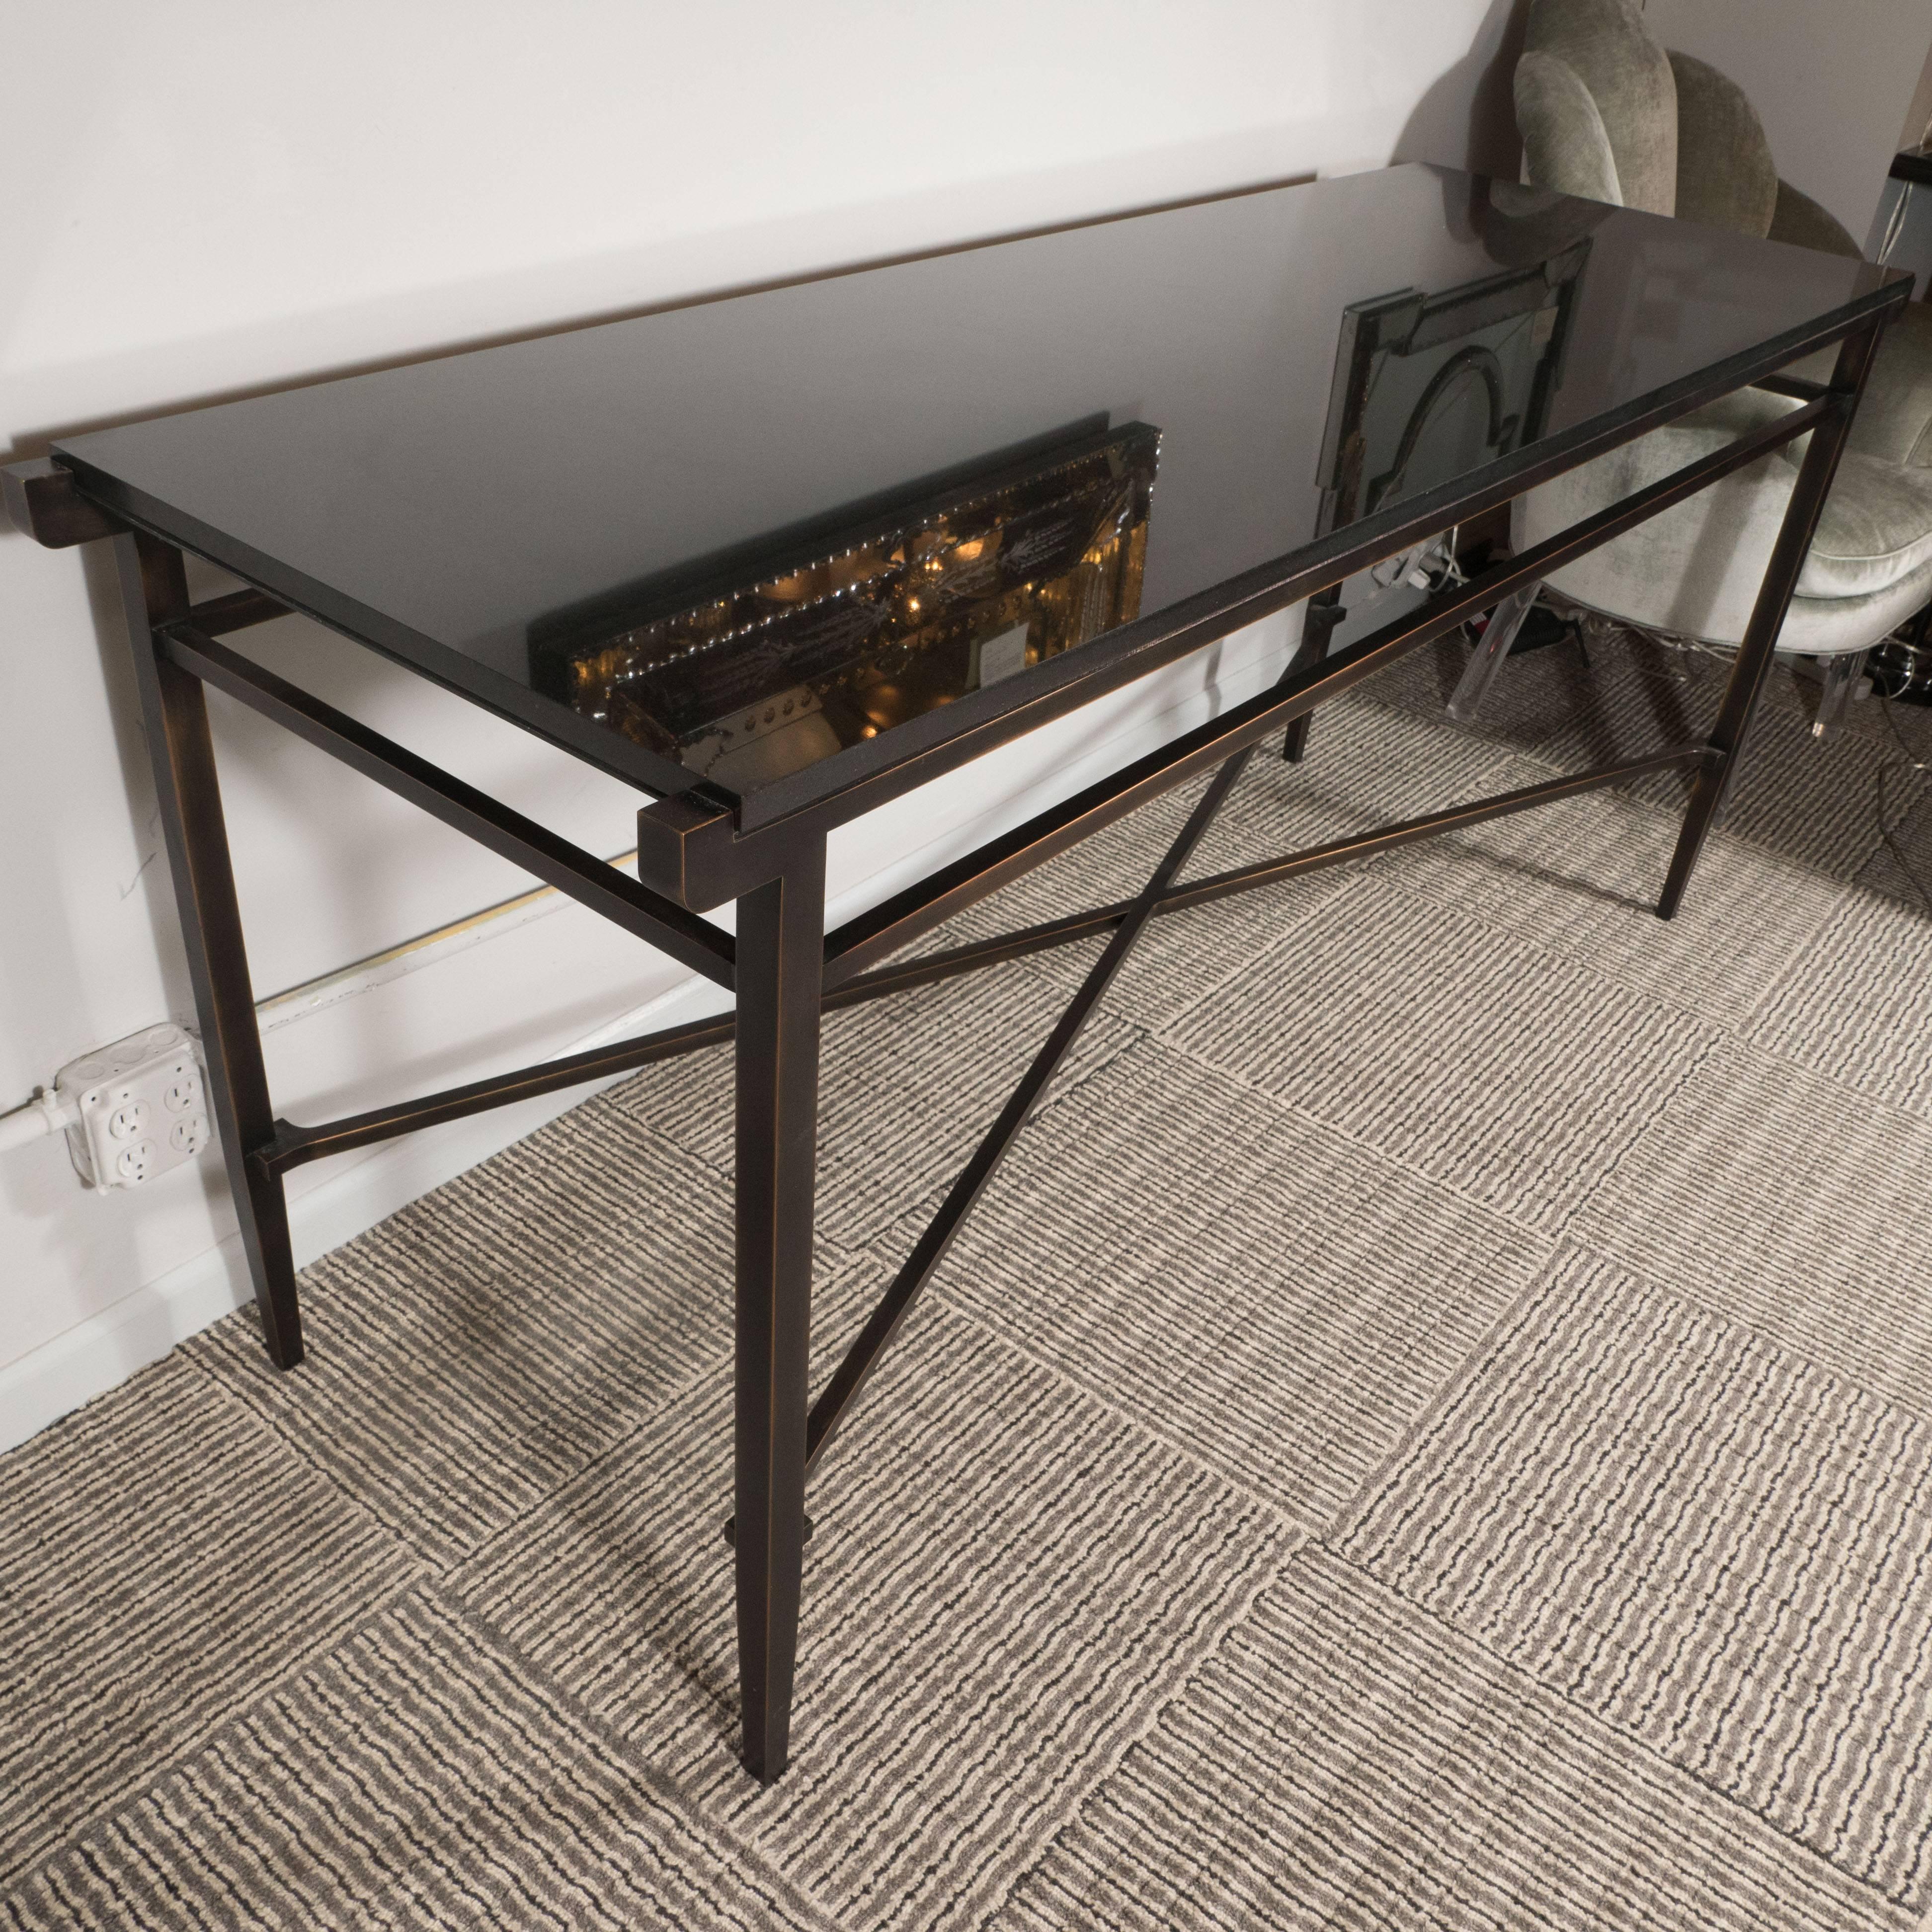 This sophisticated Mid-Century Modern table was custom-made by the esteemed designer Noel Jeffrey in the United States, circa 1980. It embodies the refined aesthetic and attention to detail that we prize. The hand rubbed bronze offers a subtle tonal